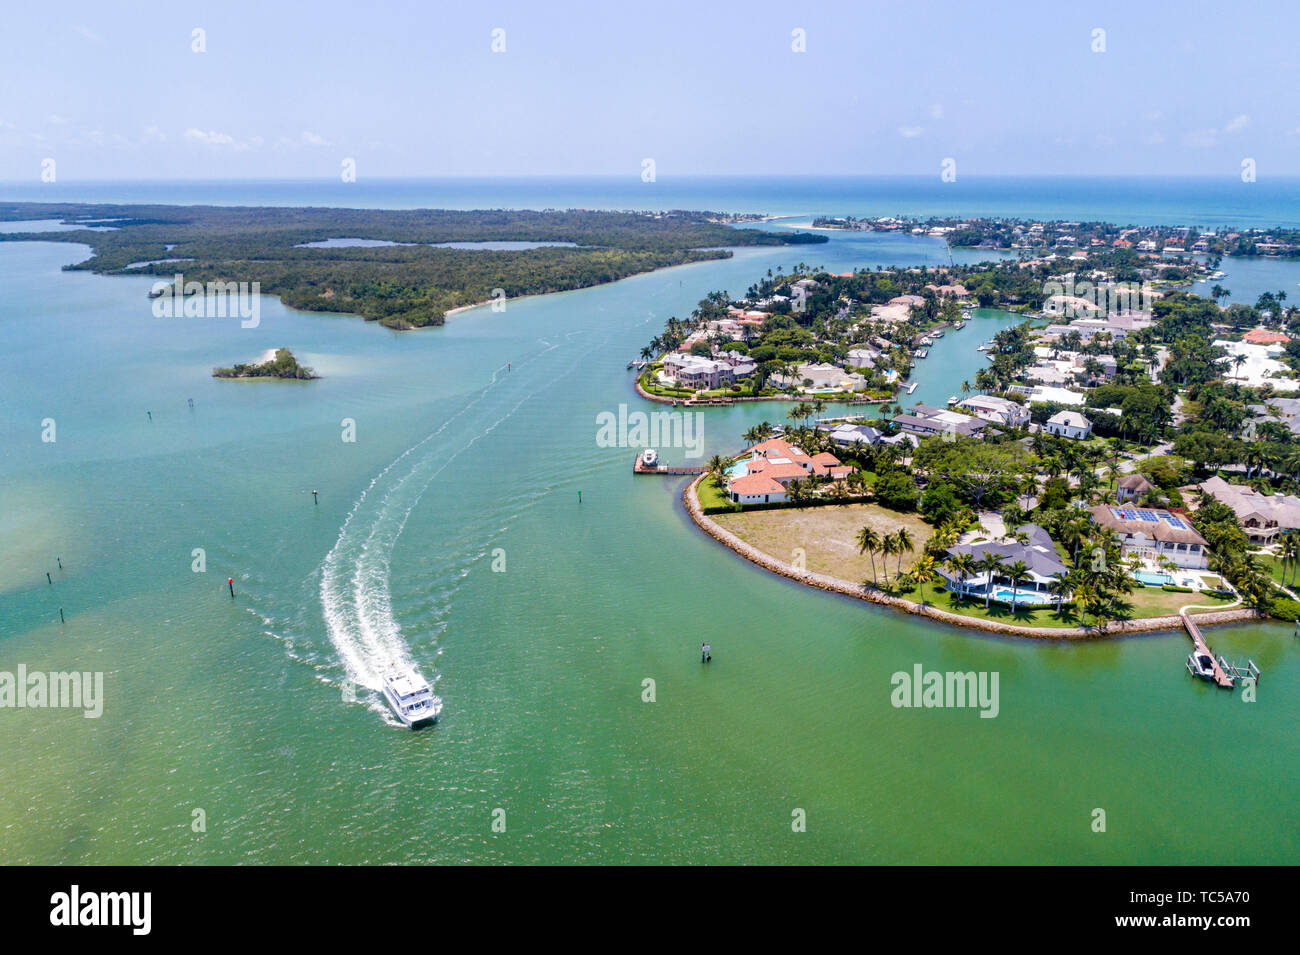 Naples Florida,Port Royal,Gordon River Pass Gulf of Mexico,Double Sunshine Sightseeing Cruise boat,estates mansions homes,aerial overhead view,FL19051 Stock Photo